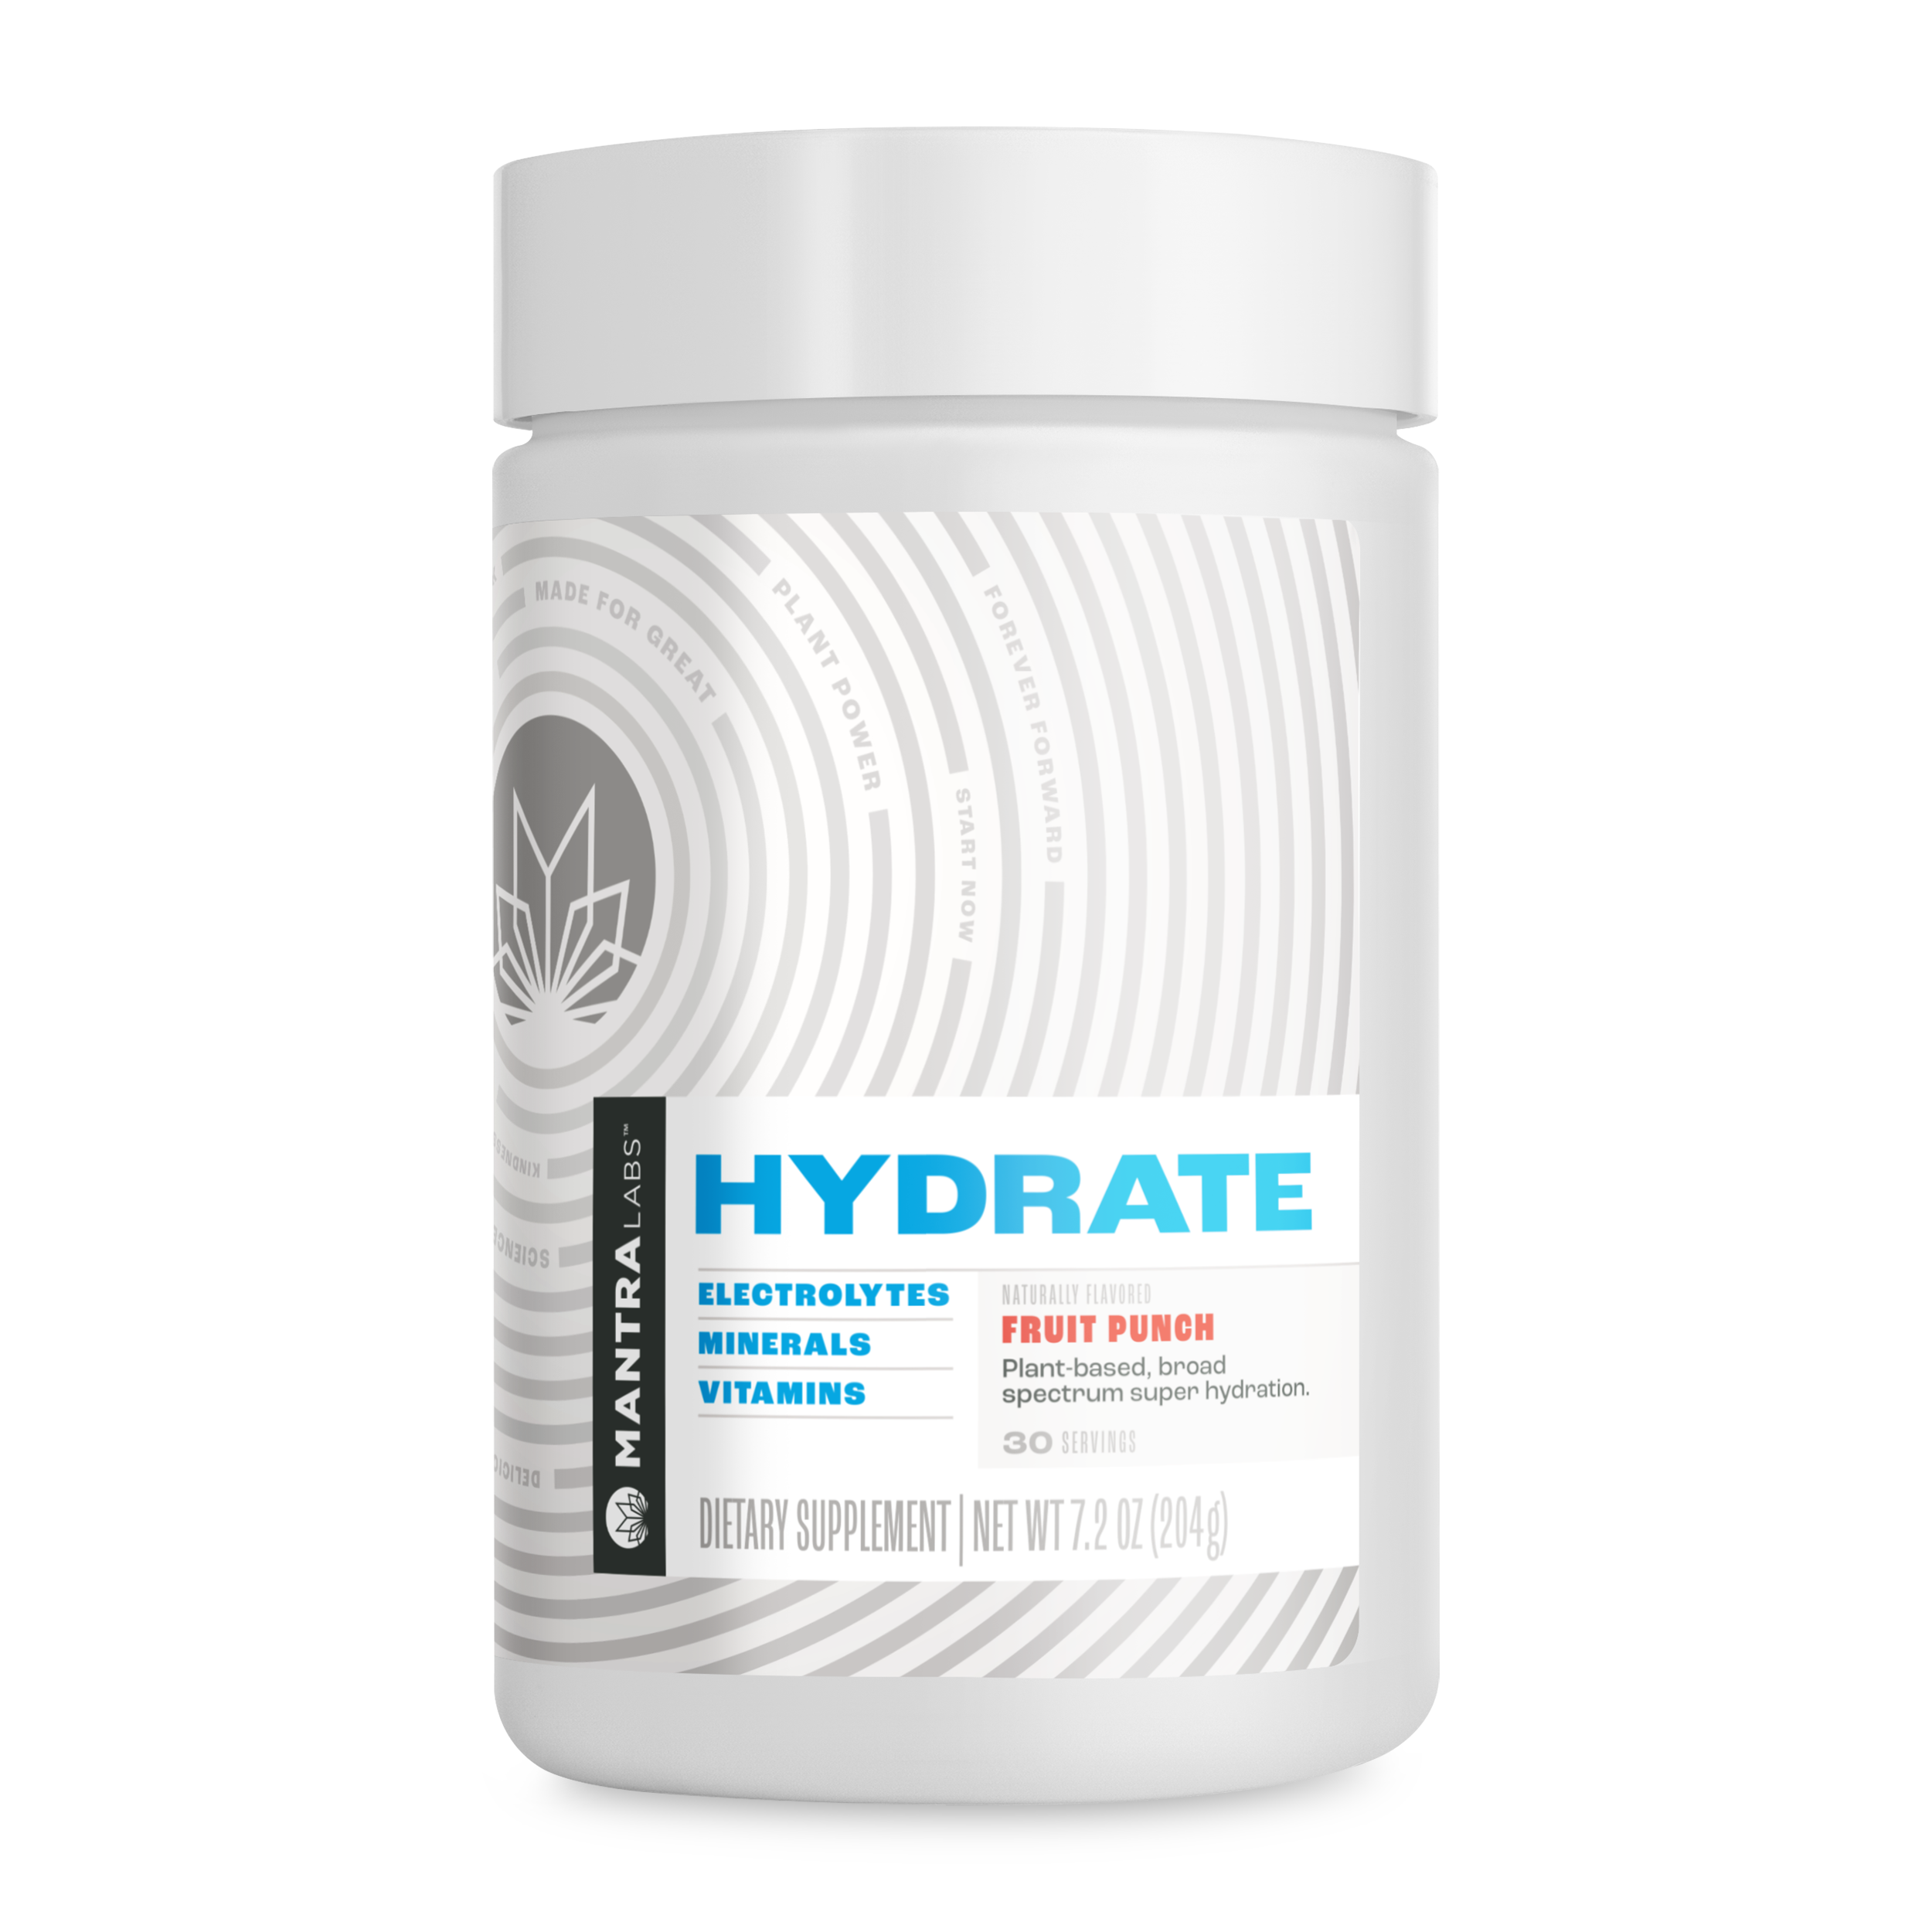 Game-changing, great-tasting, sugar-free hydration supplement